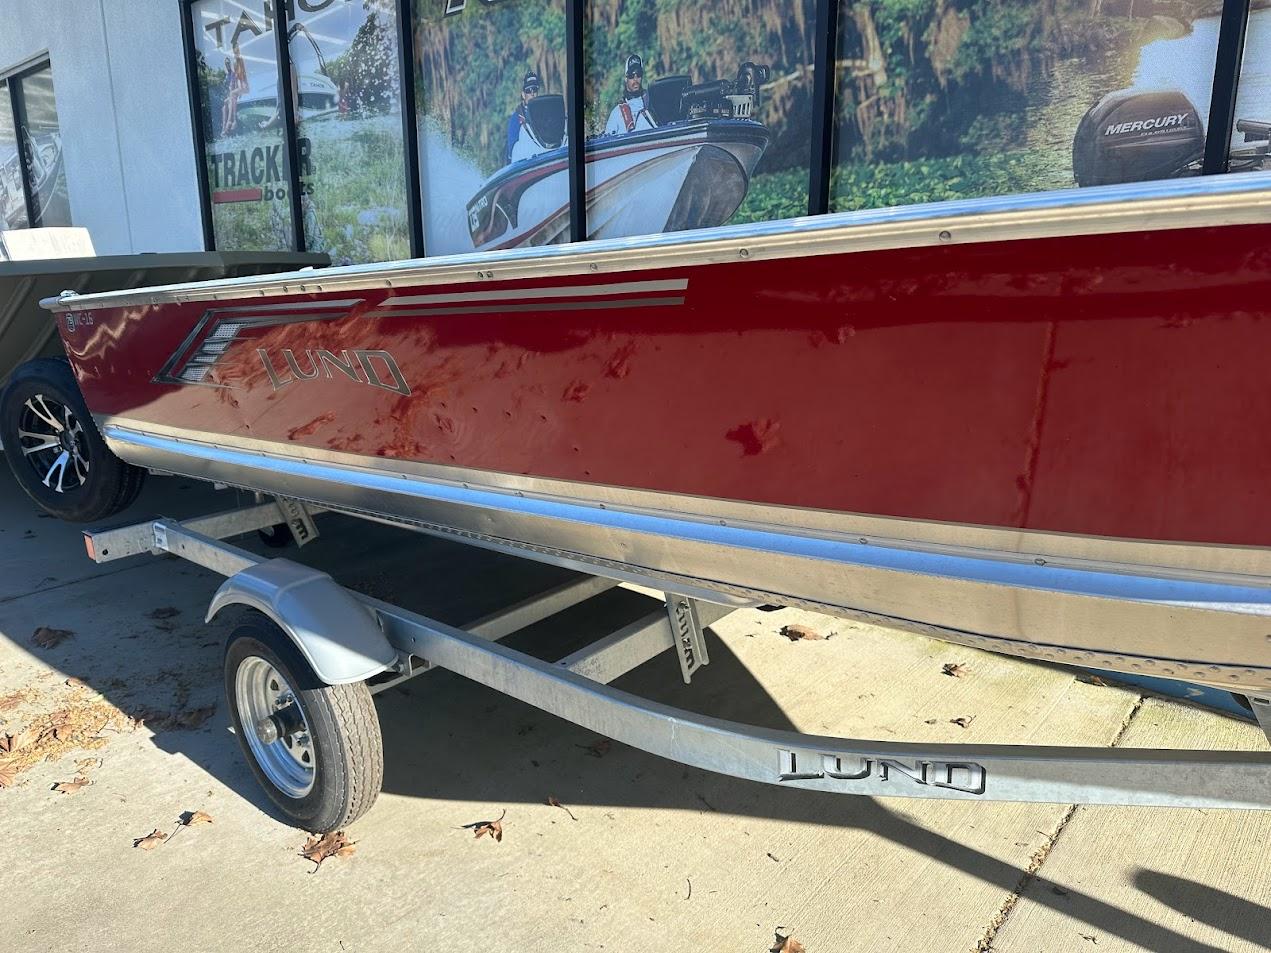 Lund WC 16 boats for sale - boats.com